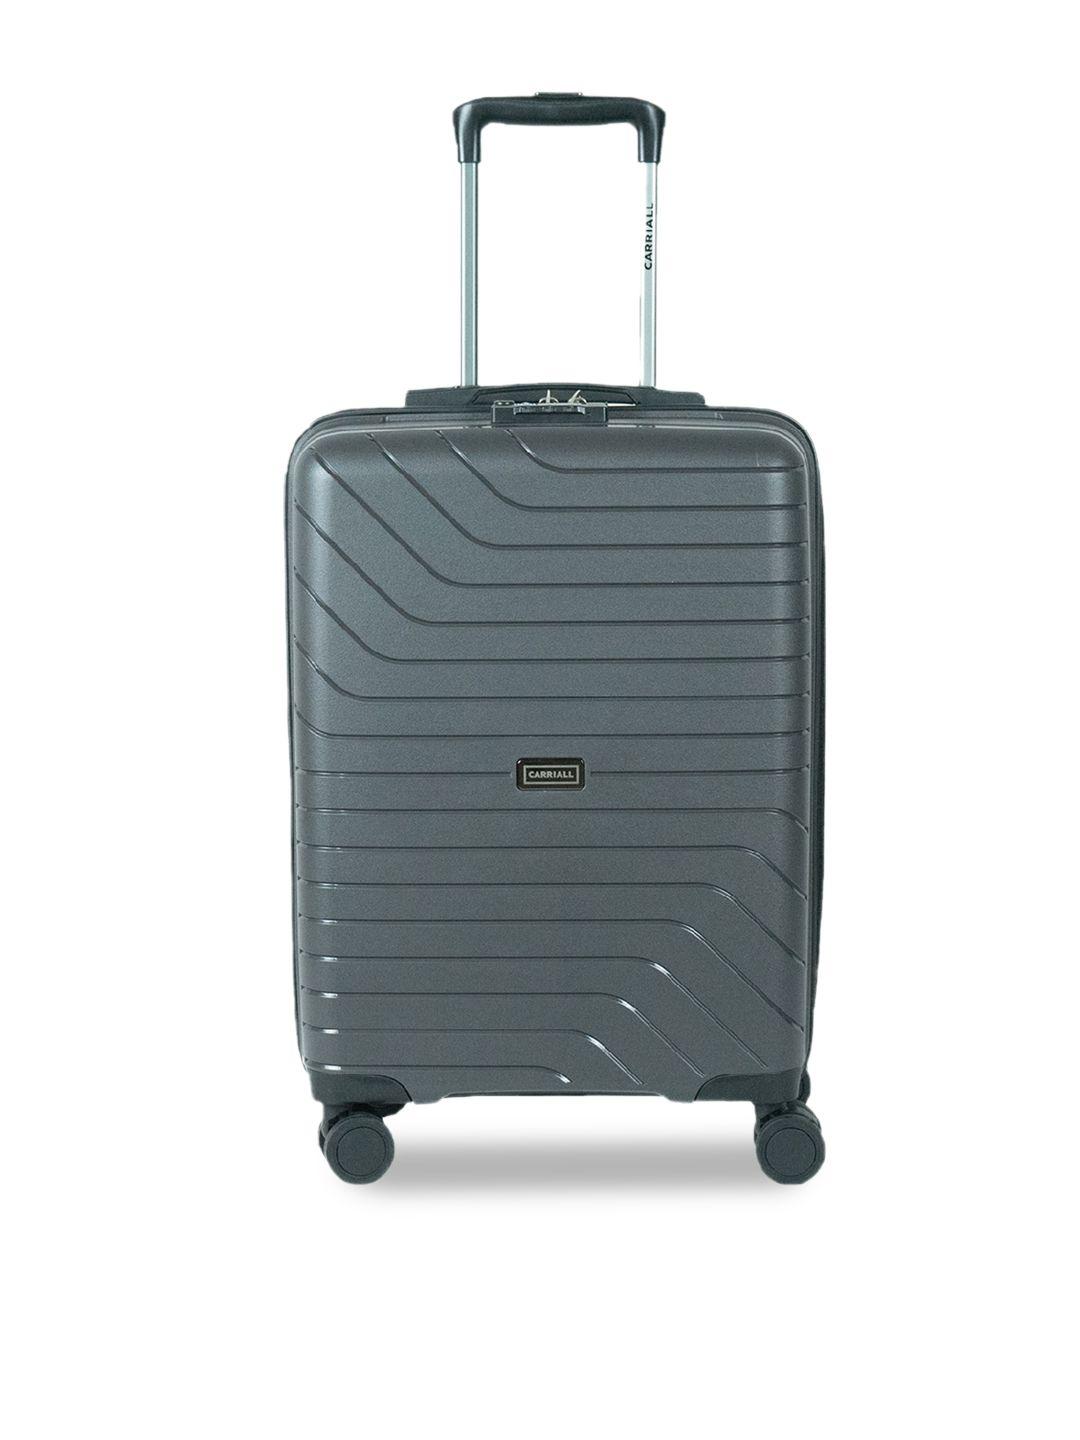 carriall textured hard-sided cabin trolley suitcase